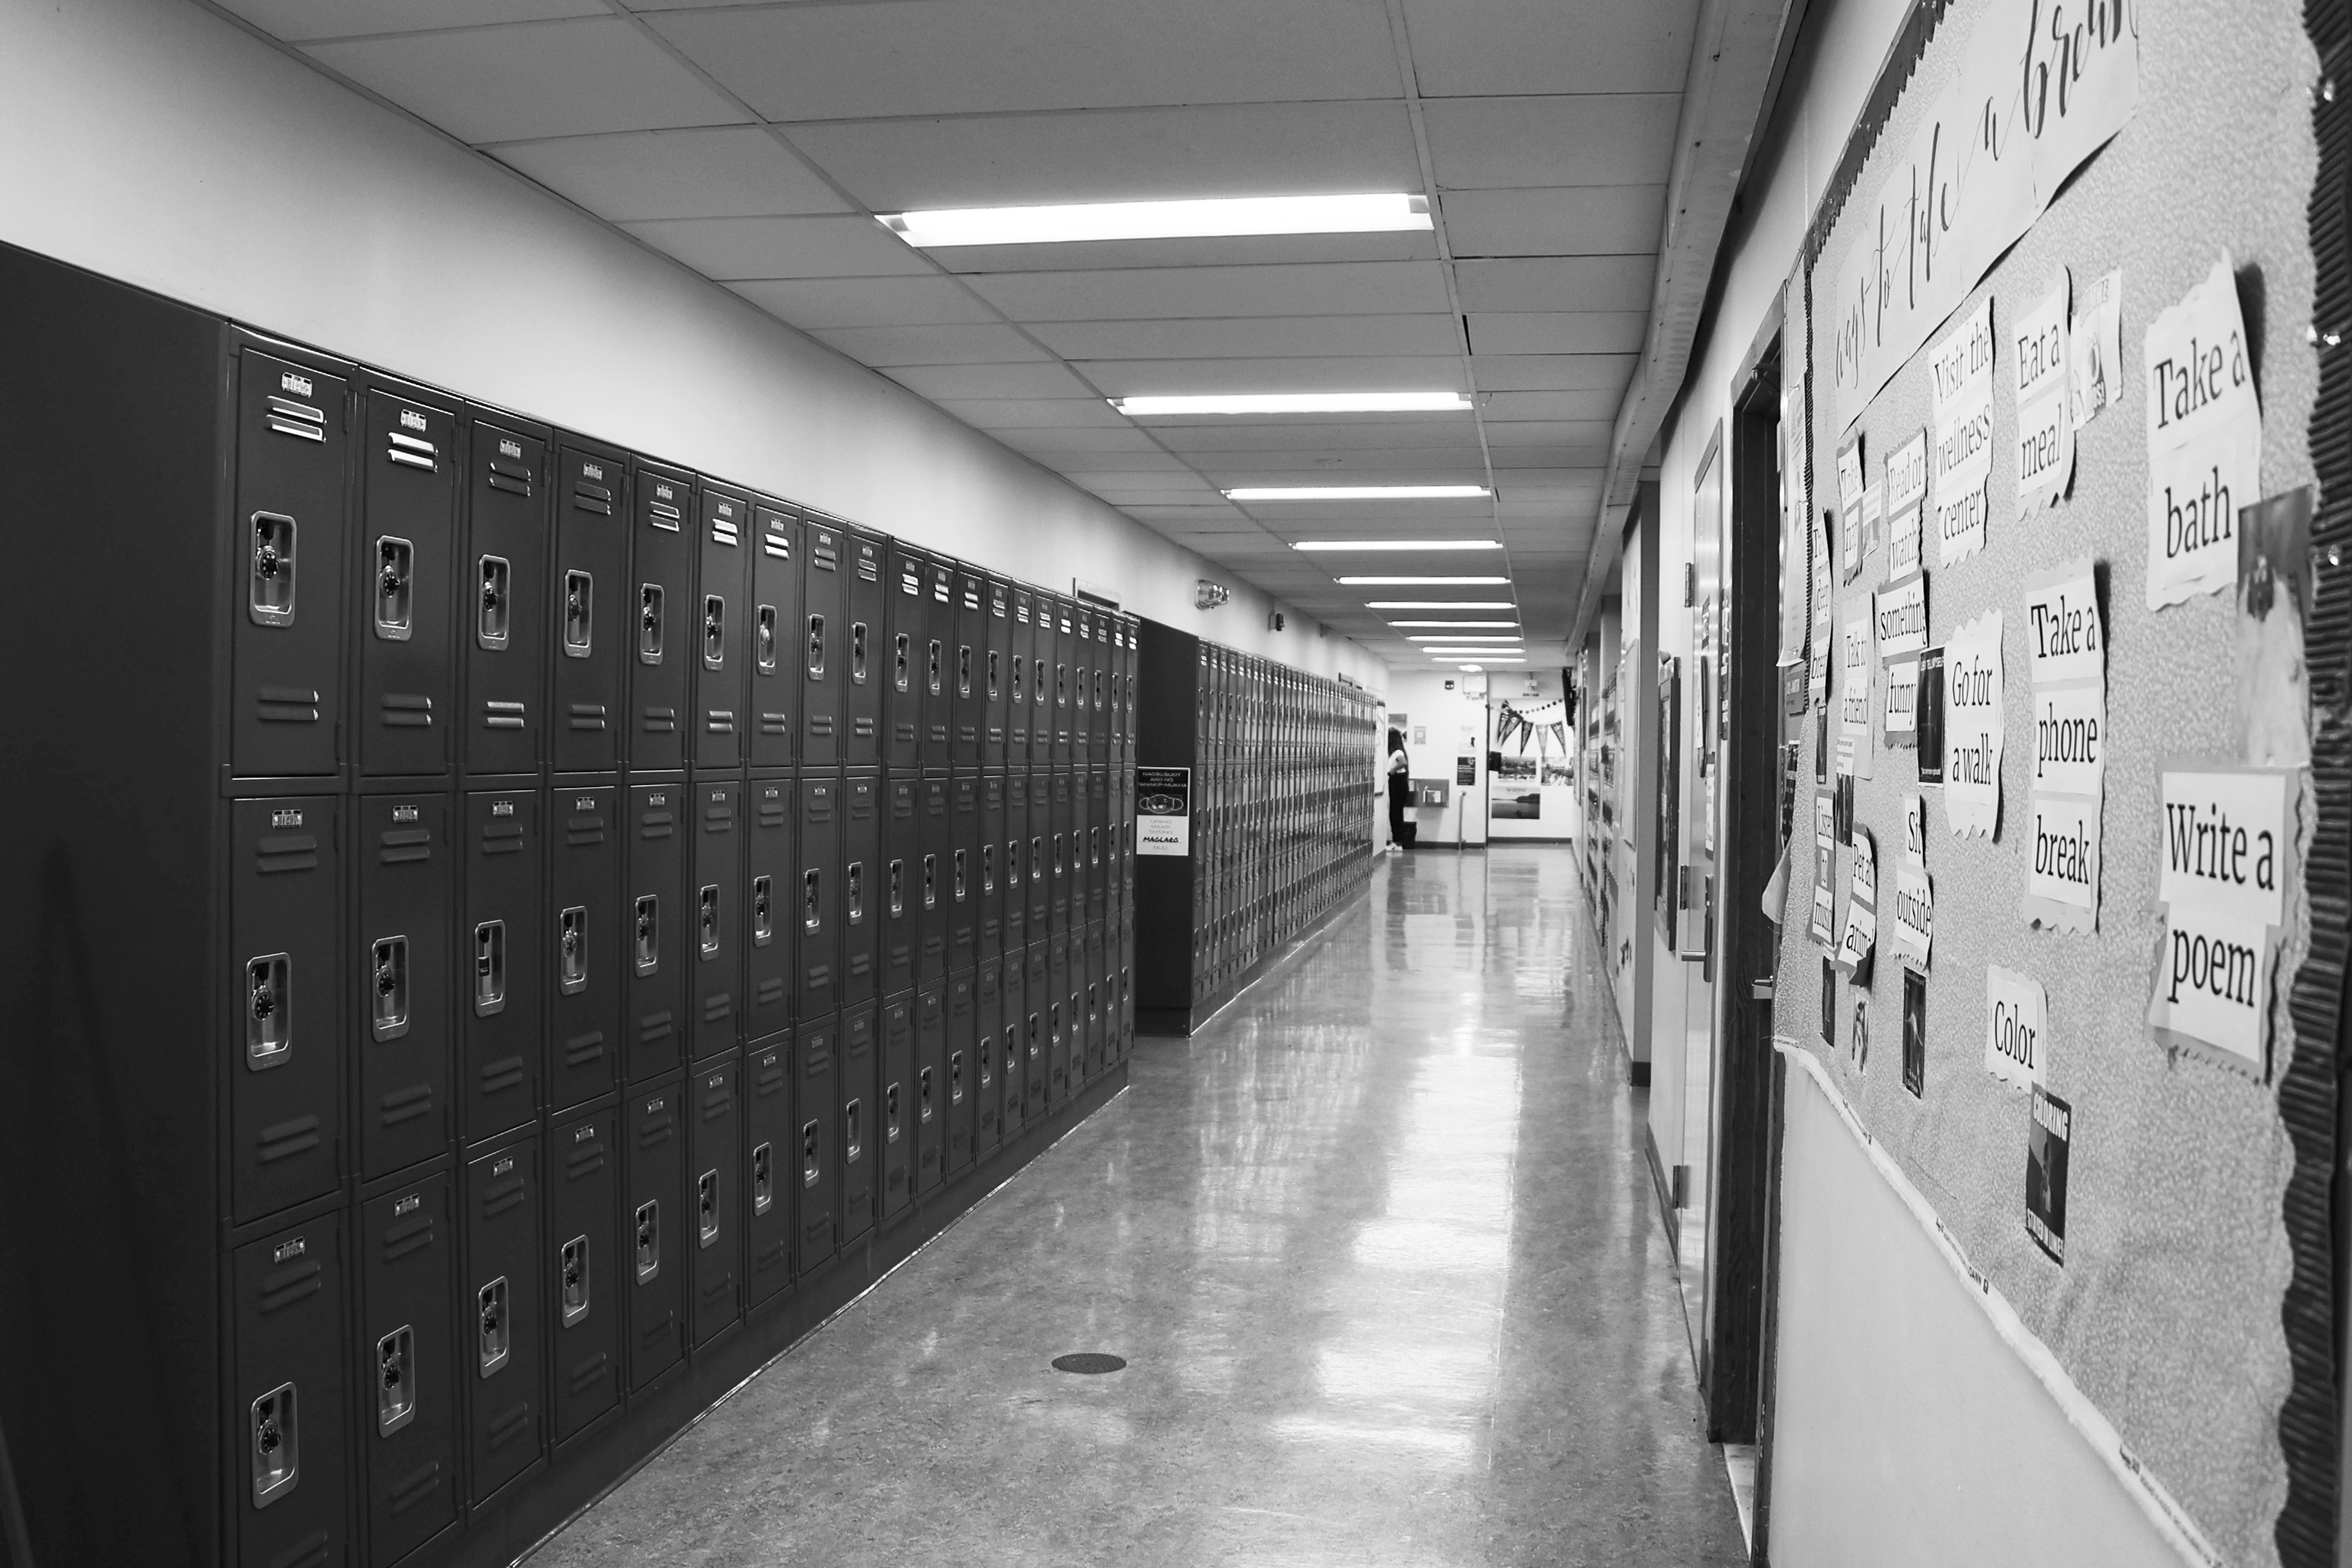 A black and white image of a long school hallway lined with rows of lockers on the left and a bulletin board on the right, under bright ceiling lights.